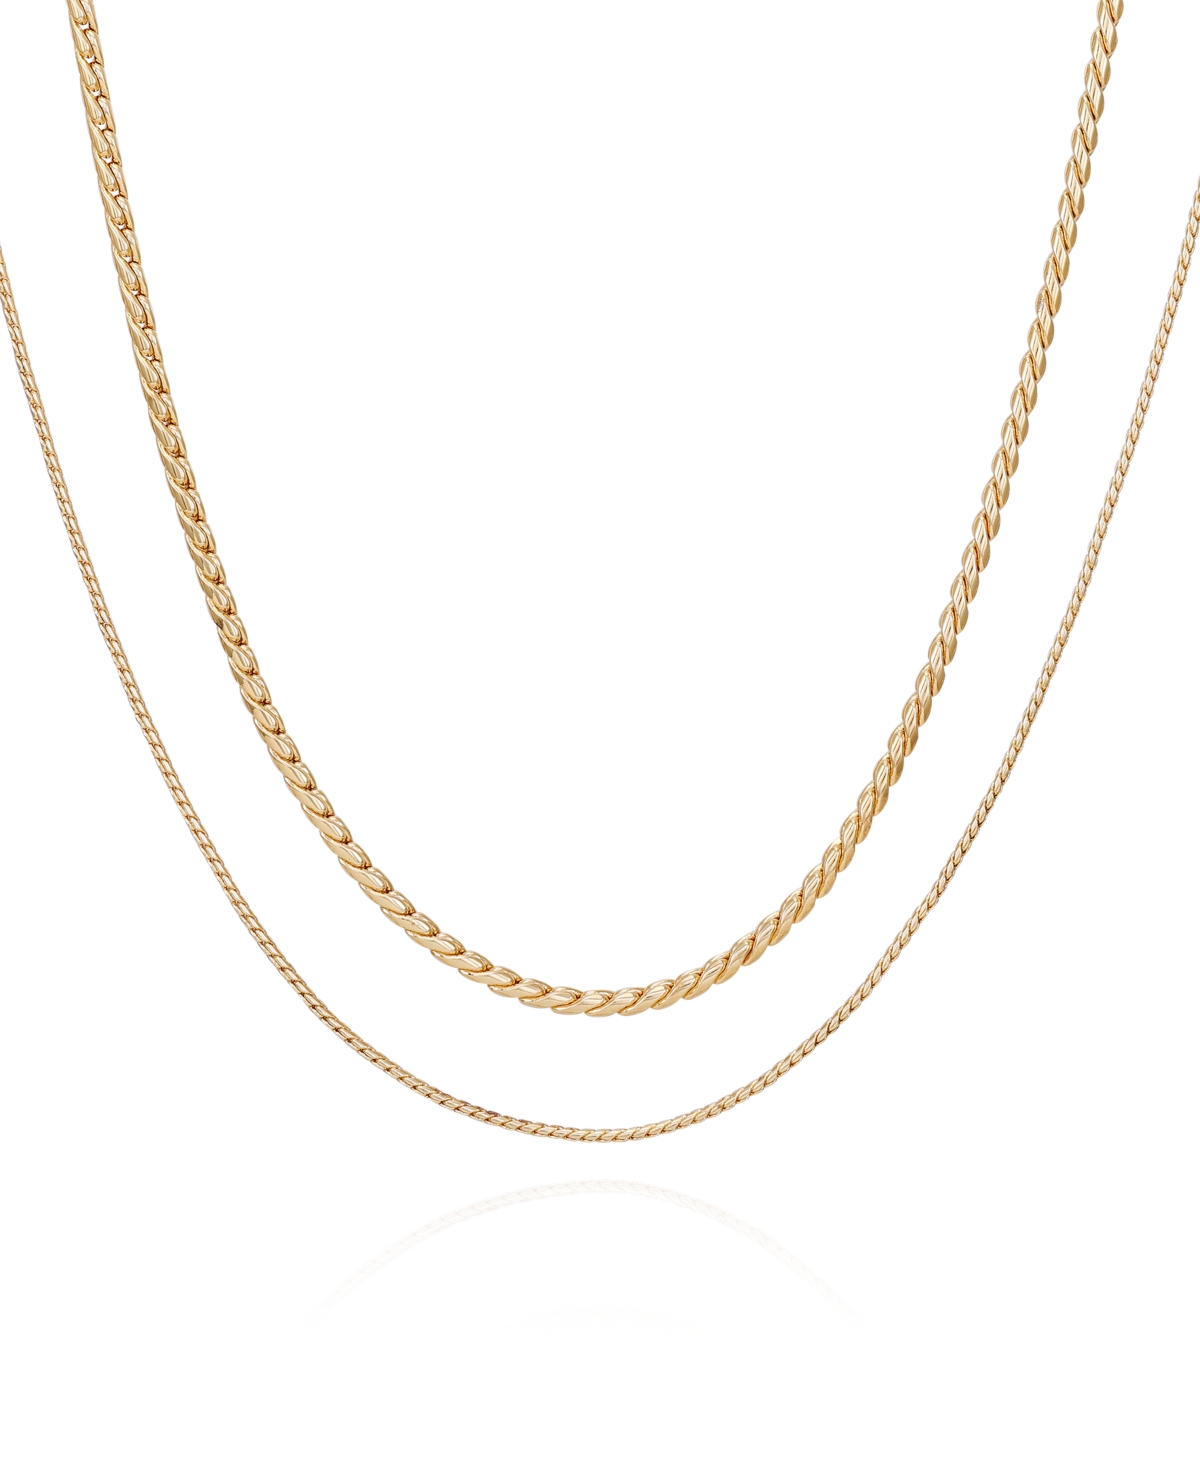 Gold-Tone Tri-Layered Chain Necklace - Gold